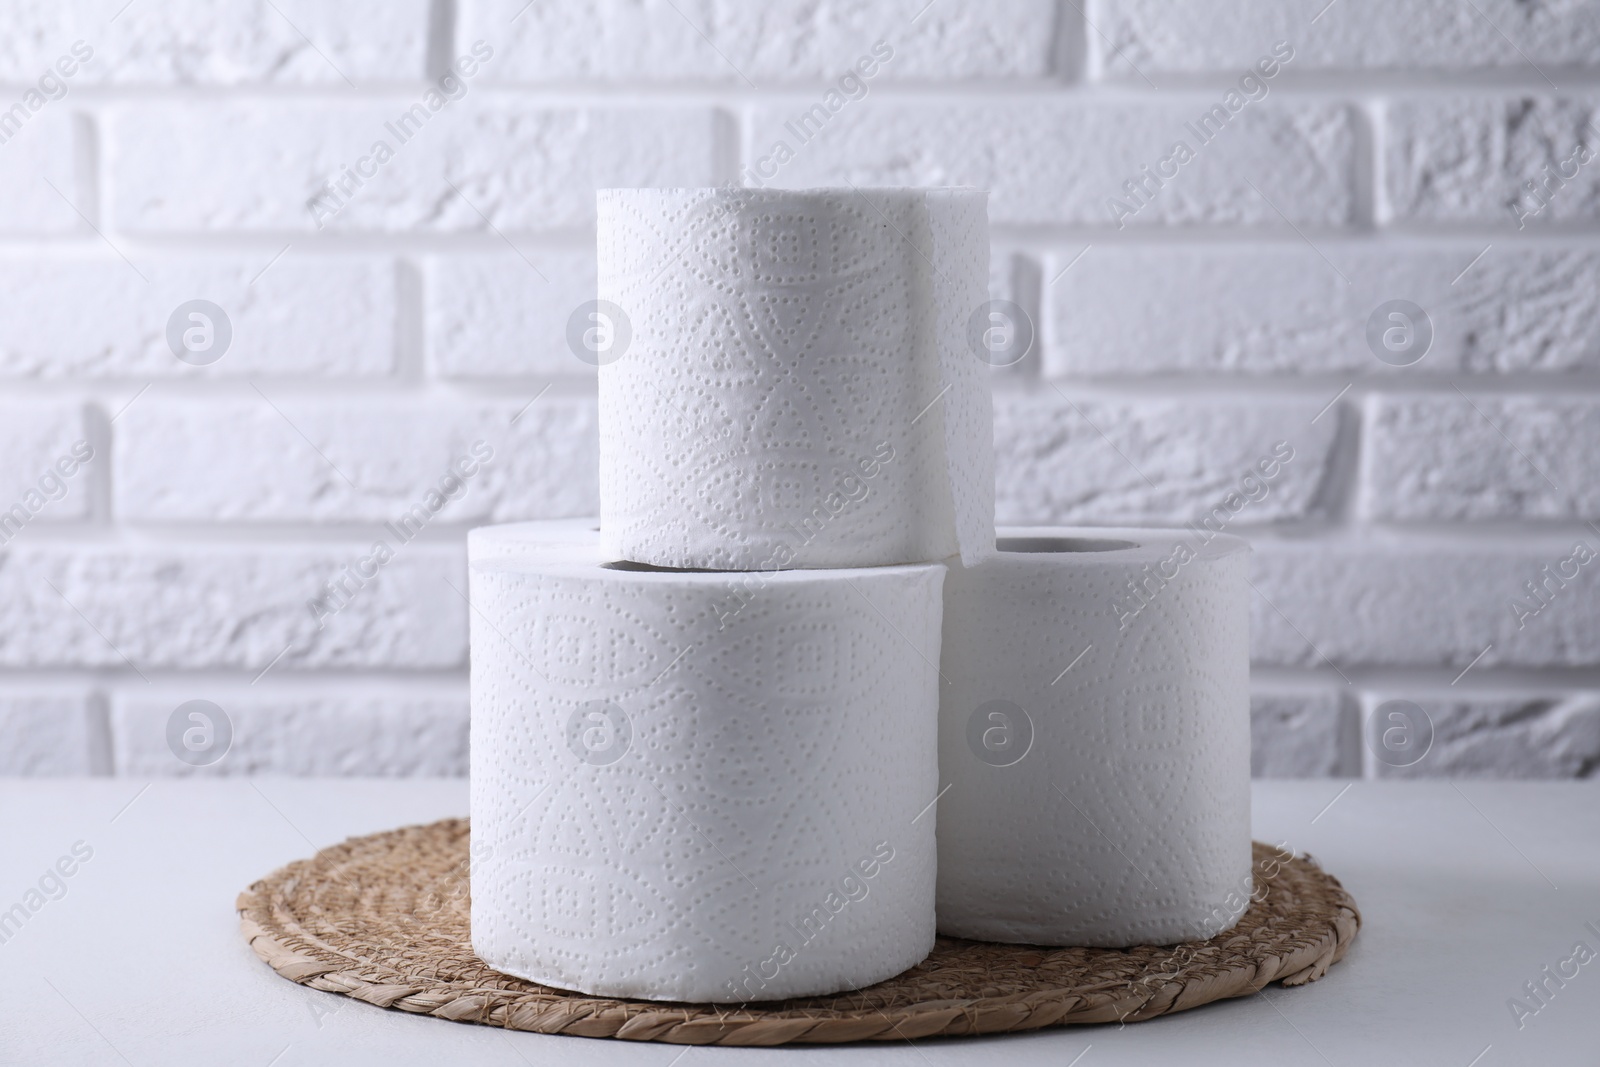 Photo of Toilet paper rolls on white table against brick wall